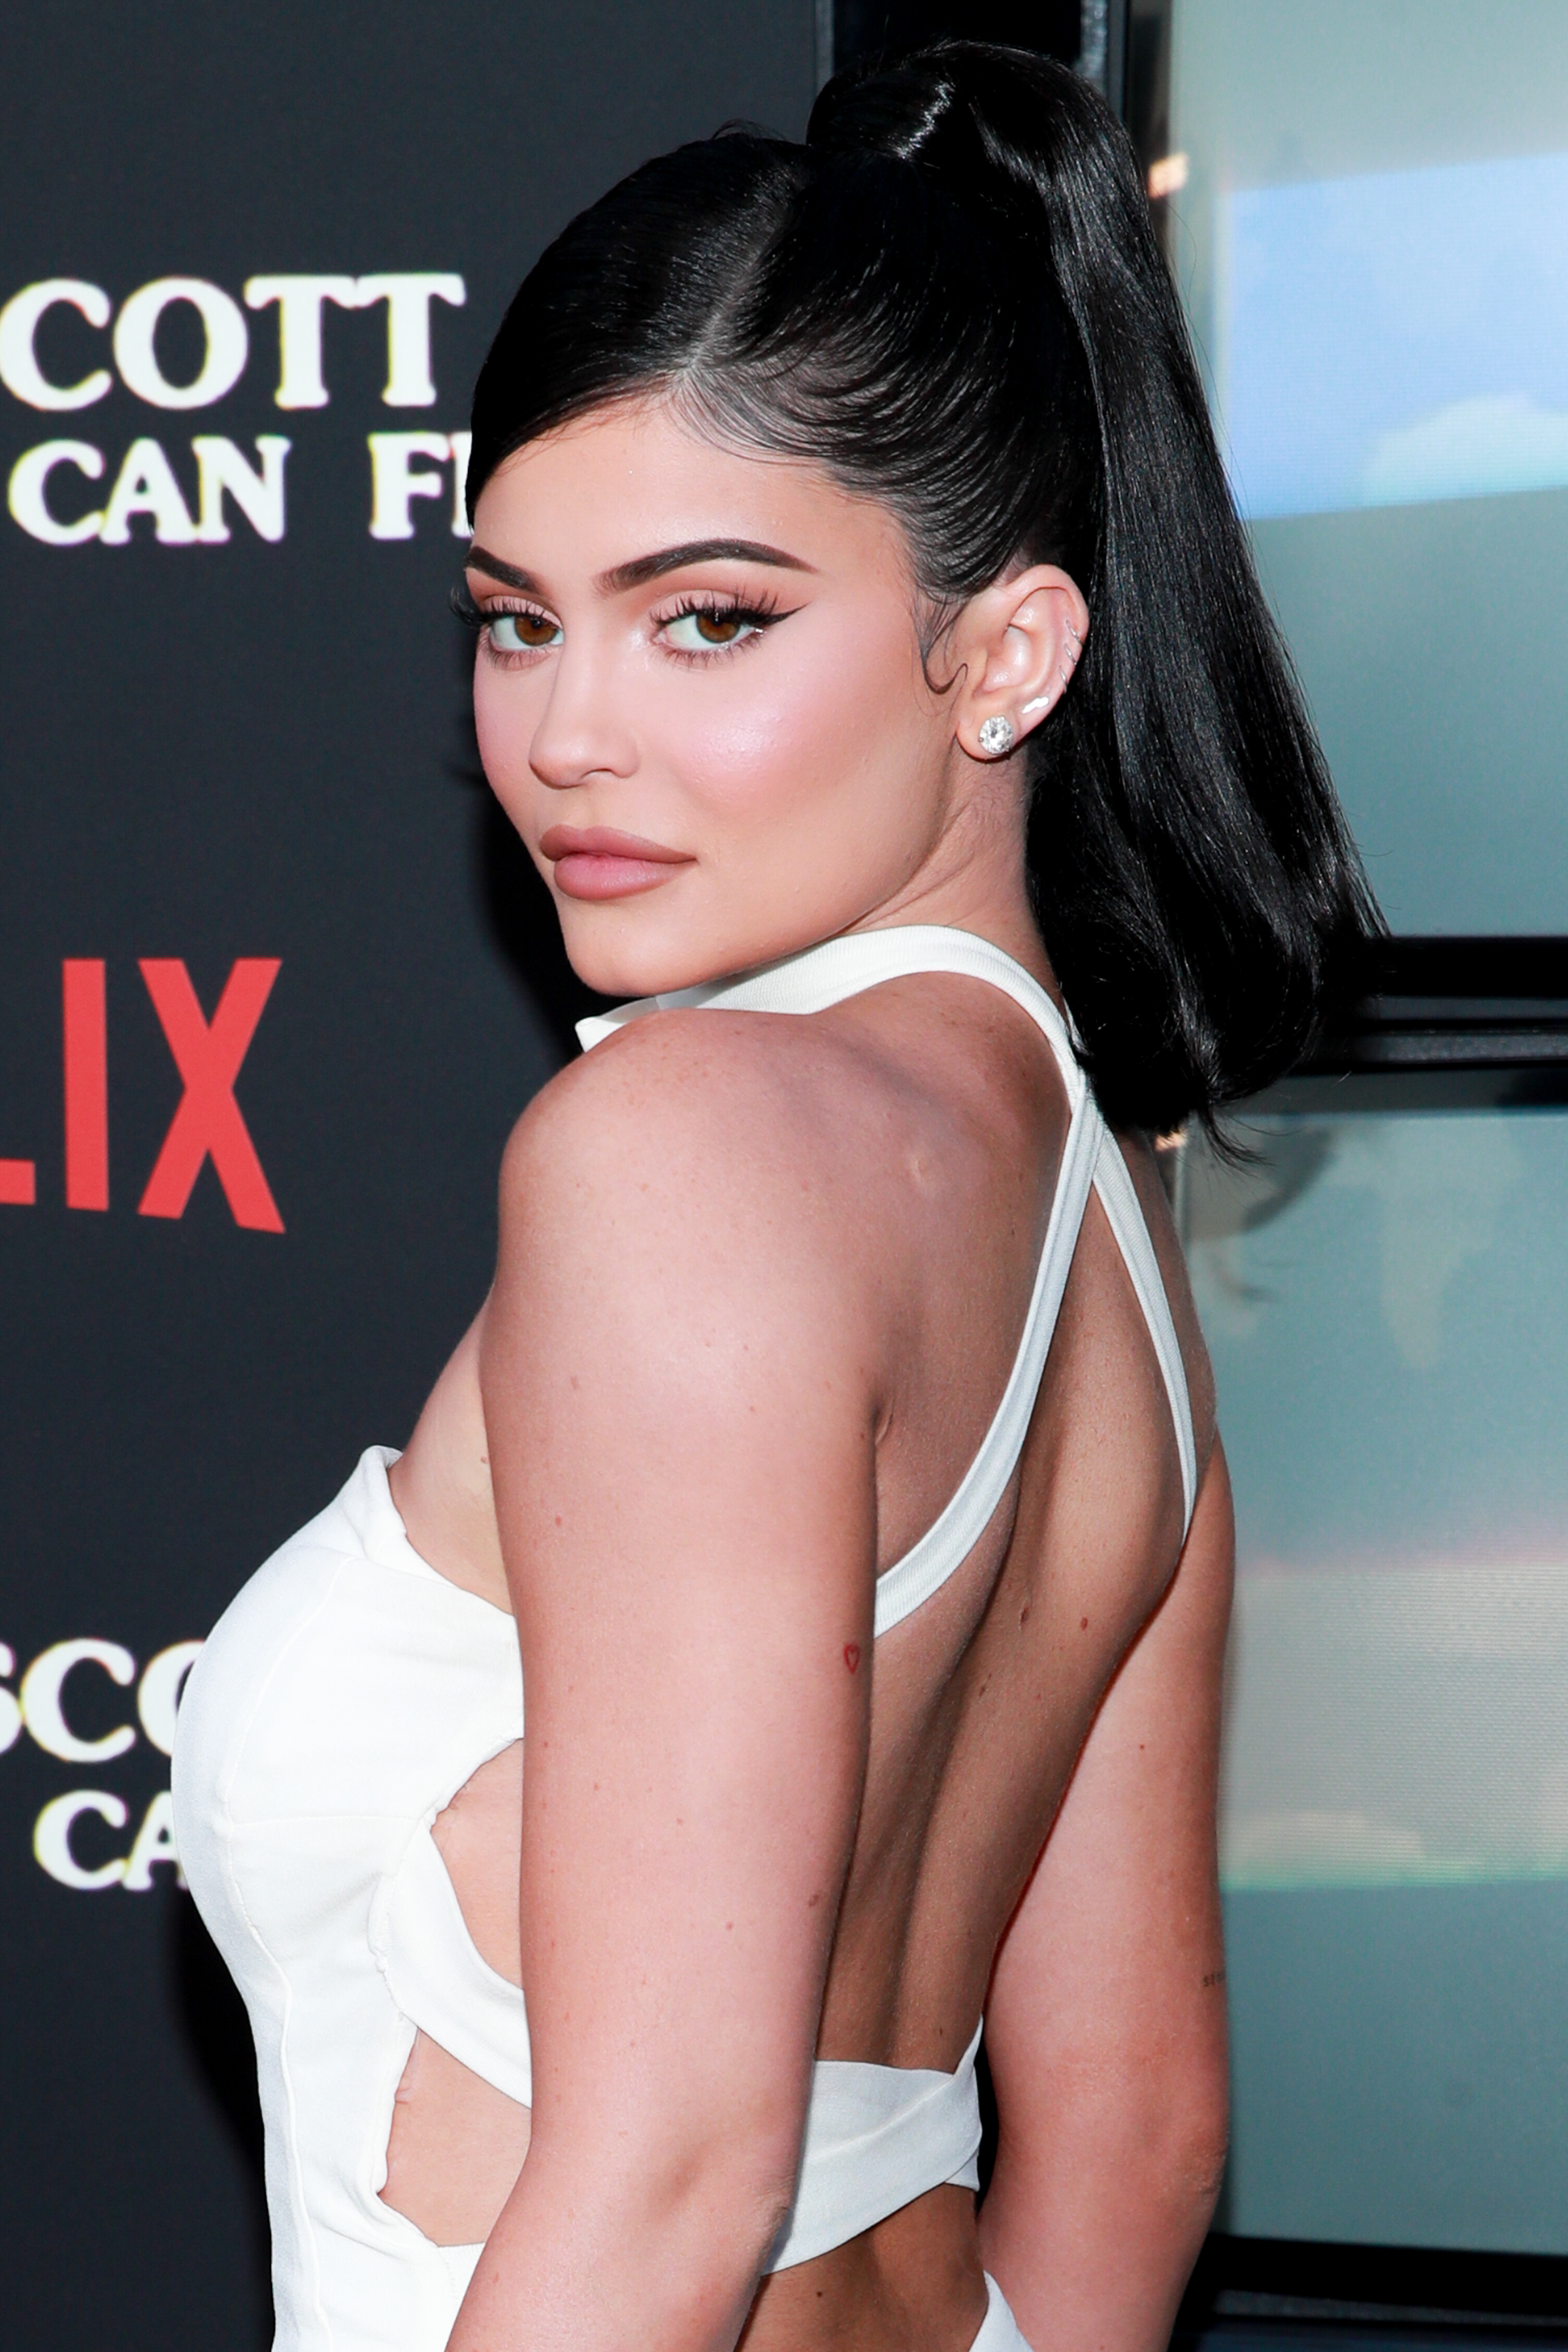 Kylie Jenner at the premiere of Netflix's "Travis Scott: Look Mom I Can Fly" on August 27, 2019, in Santa Monica, California. | Source: Getty Images